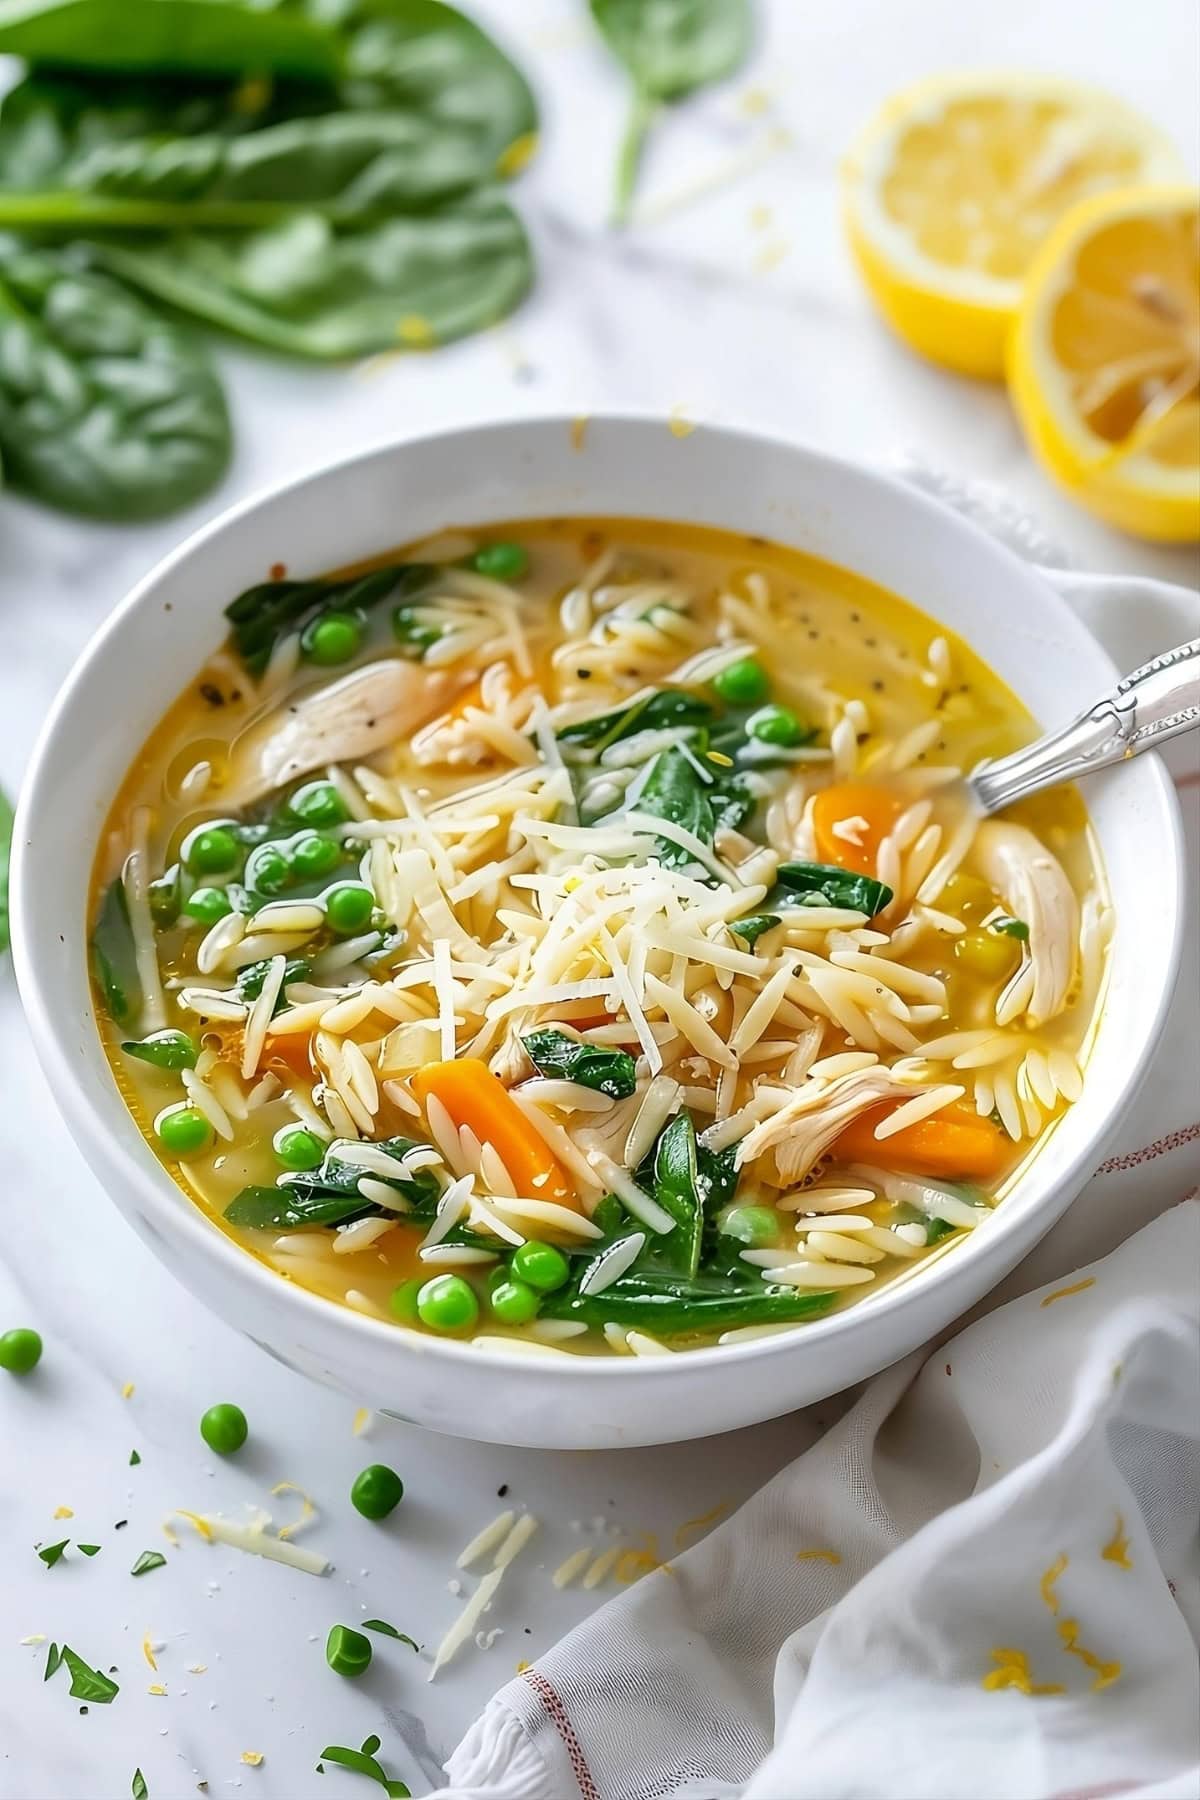 Lemon chicken orzo soup garnished with parmesan cheese served in a white bowl.